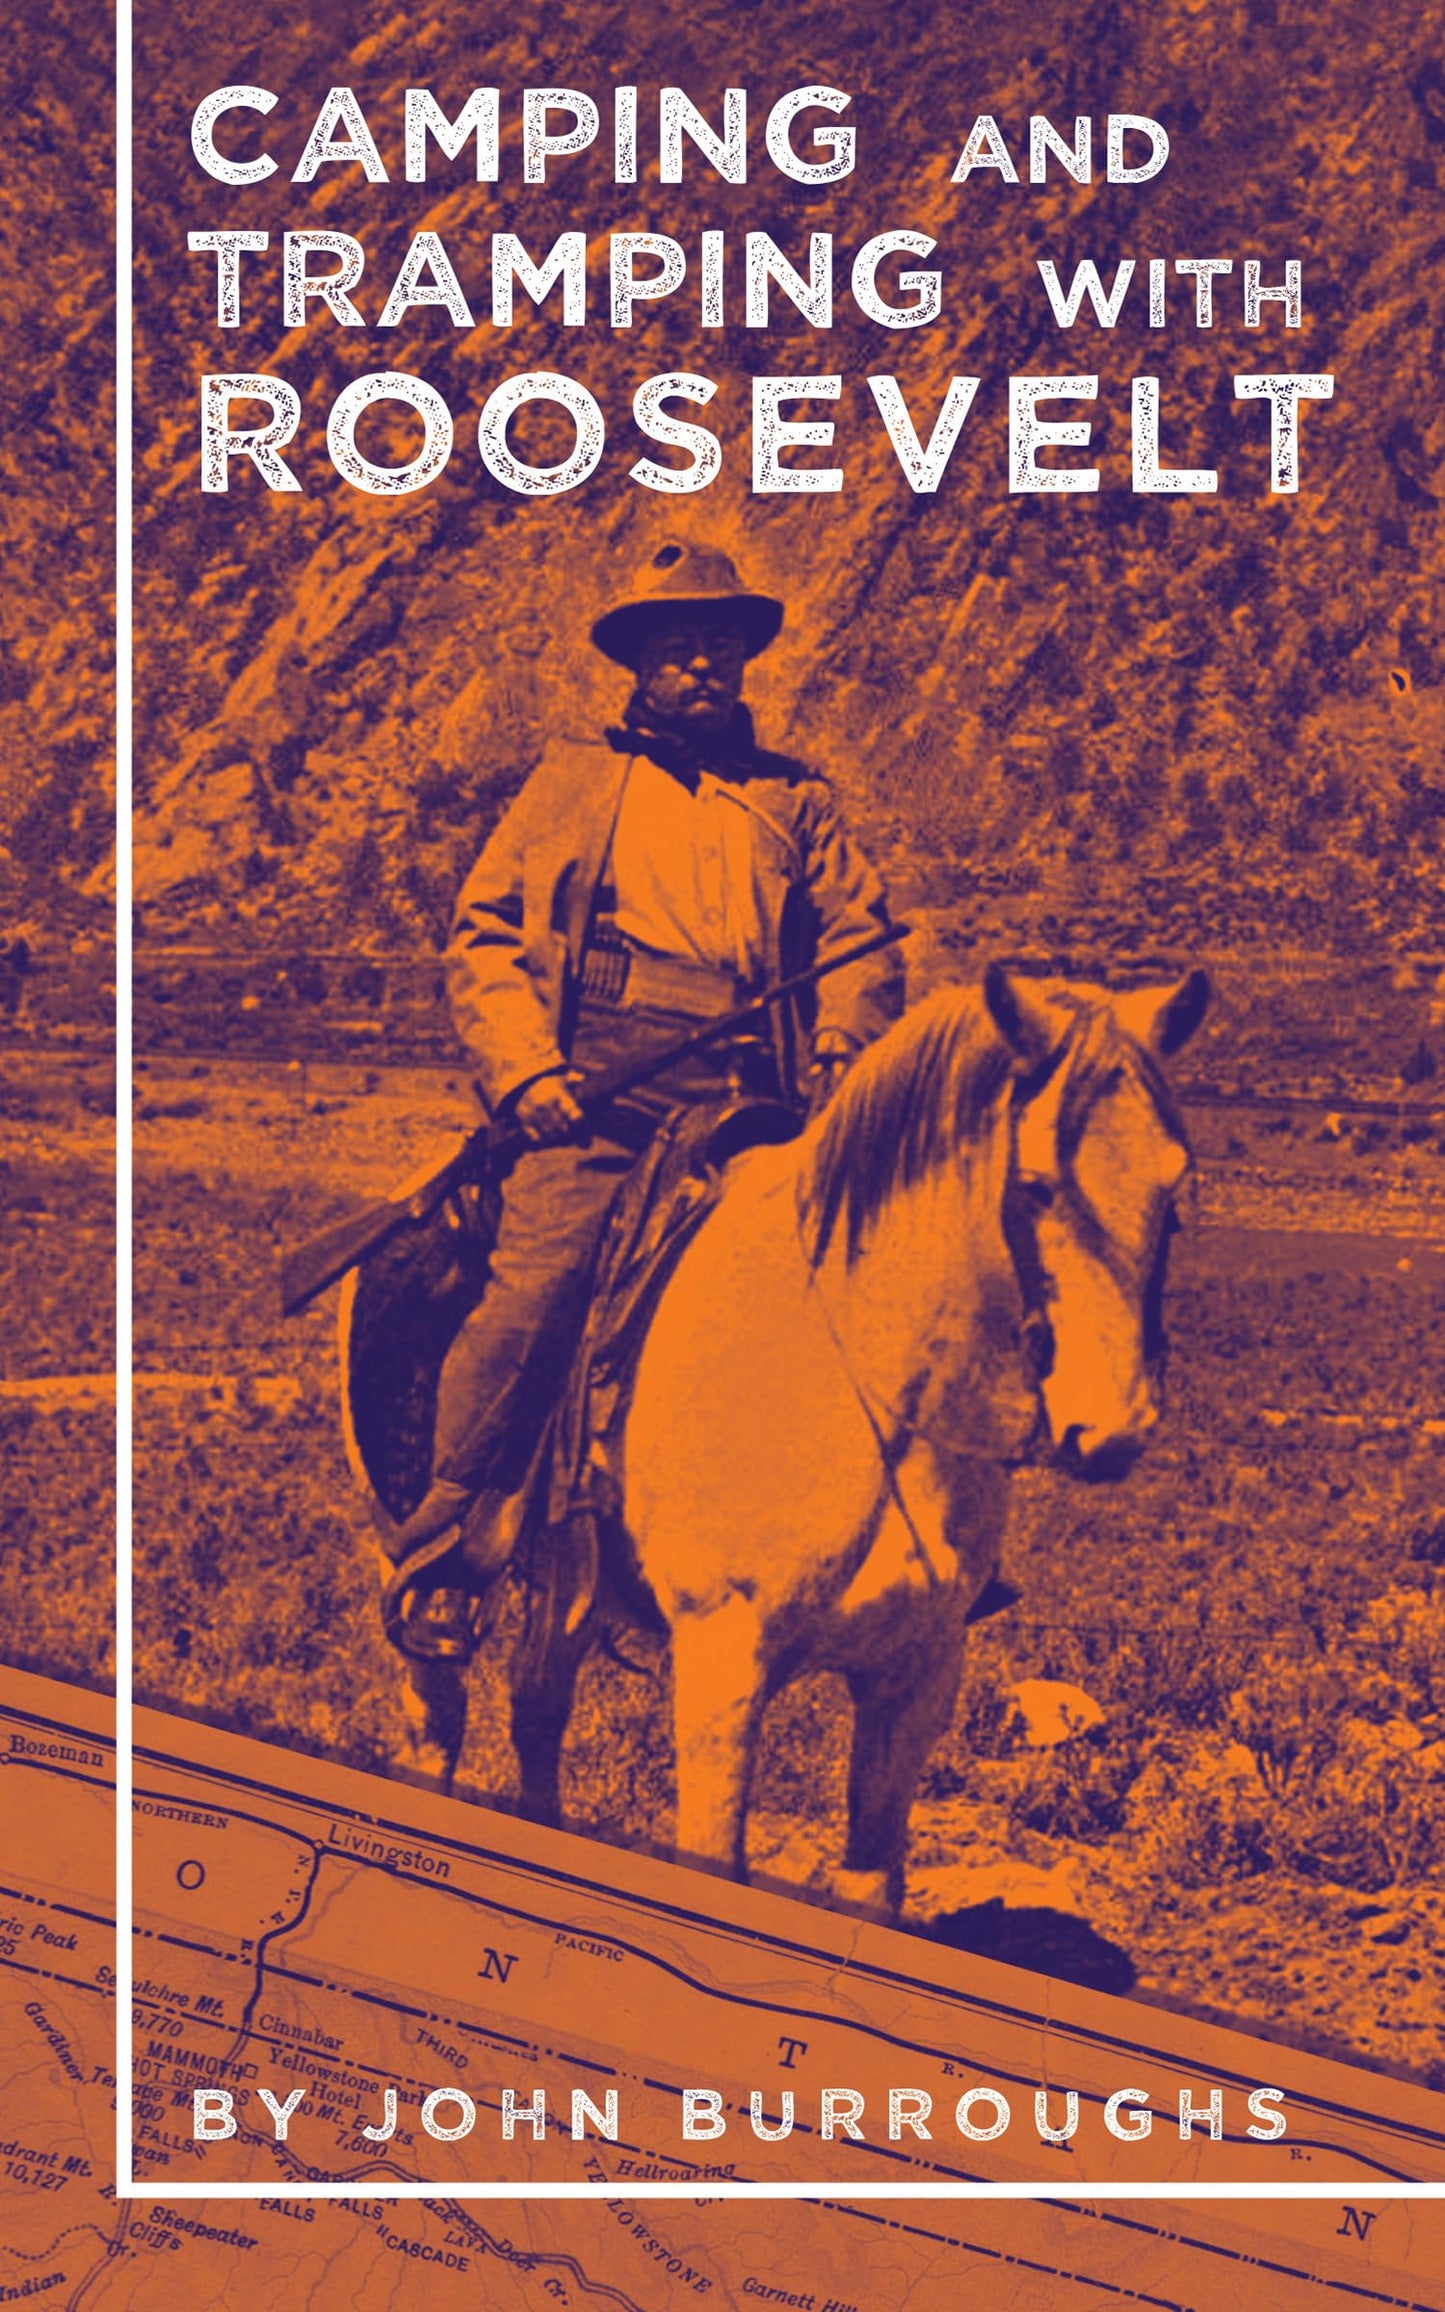 Camping and Tramping with Roosevelt (Applewood Books)